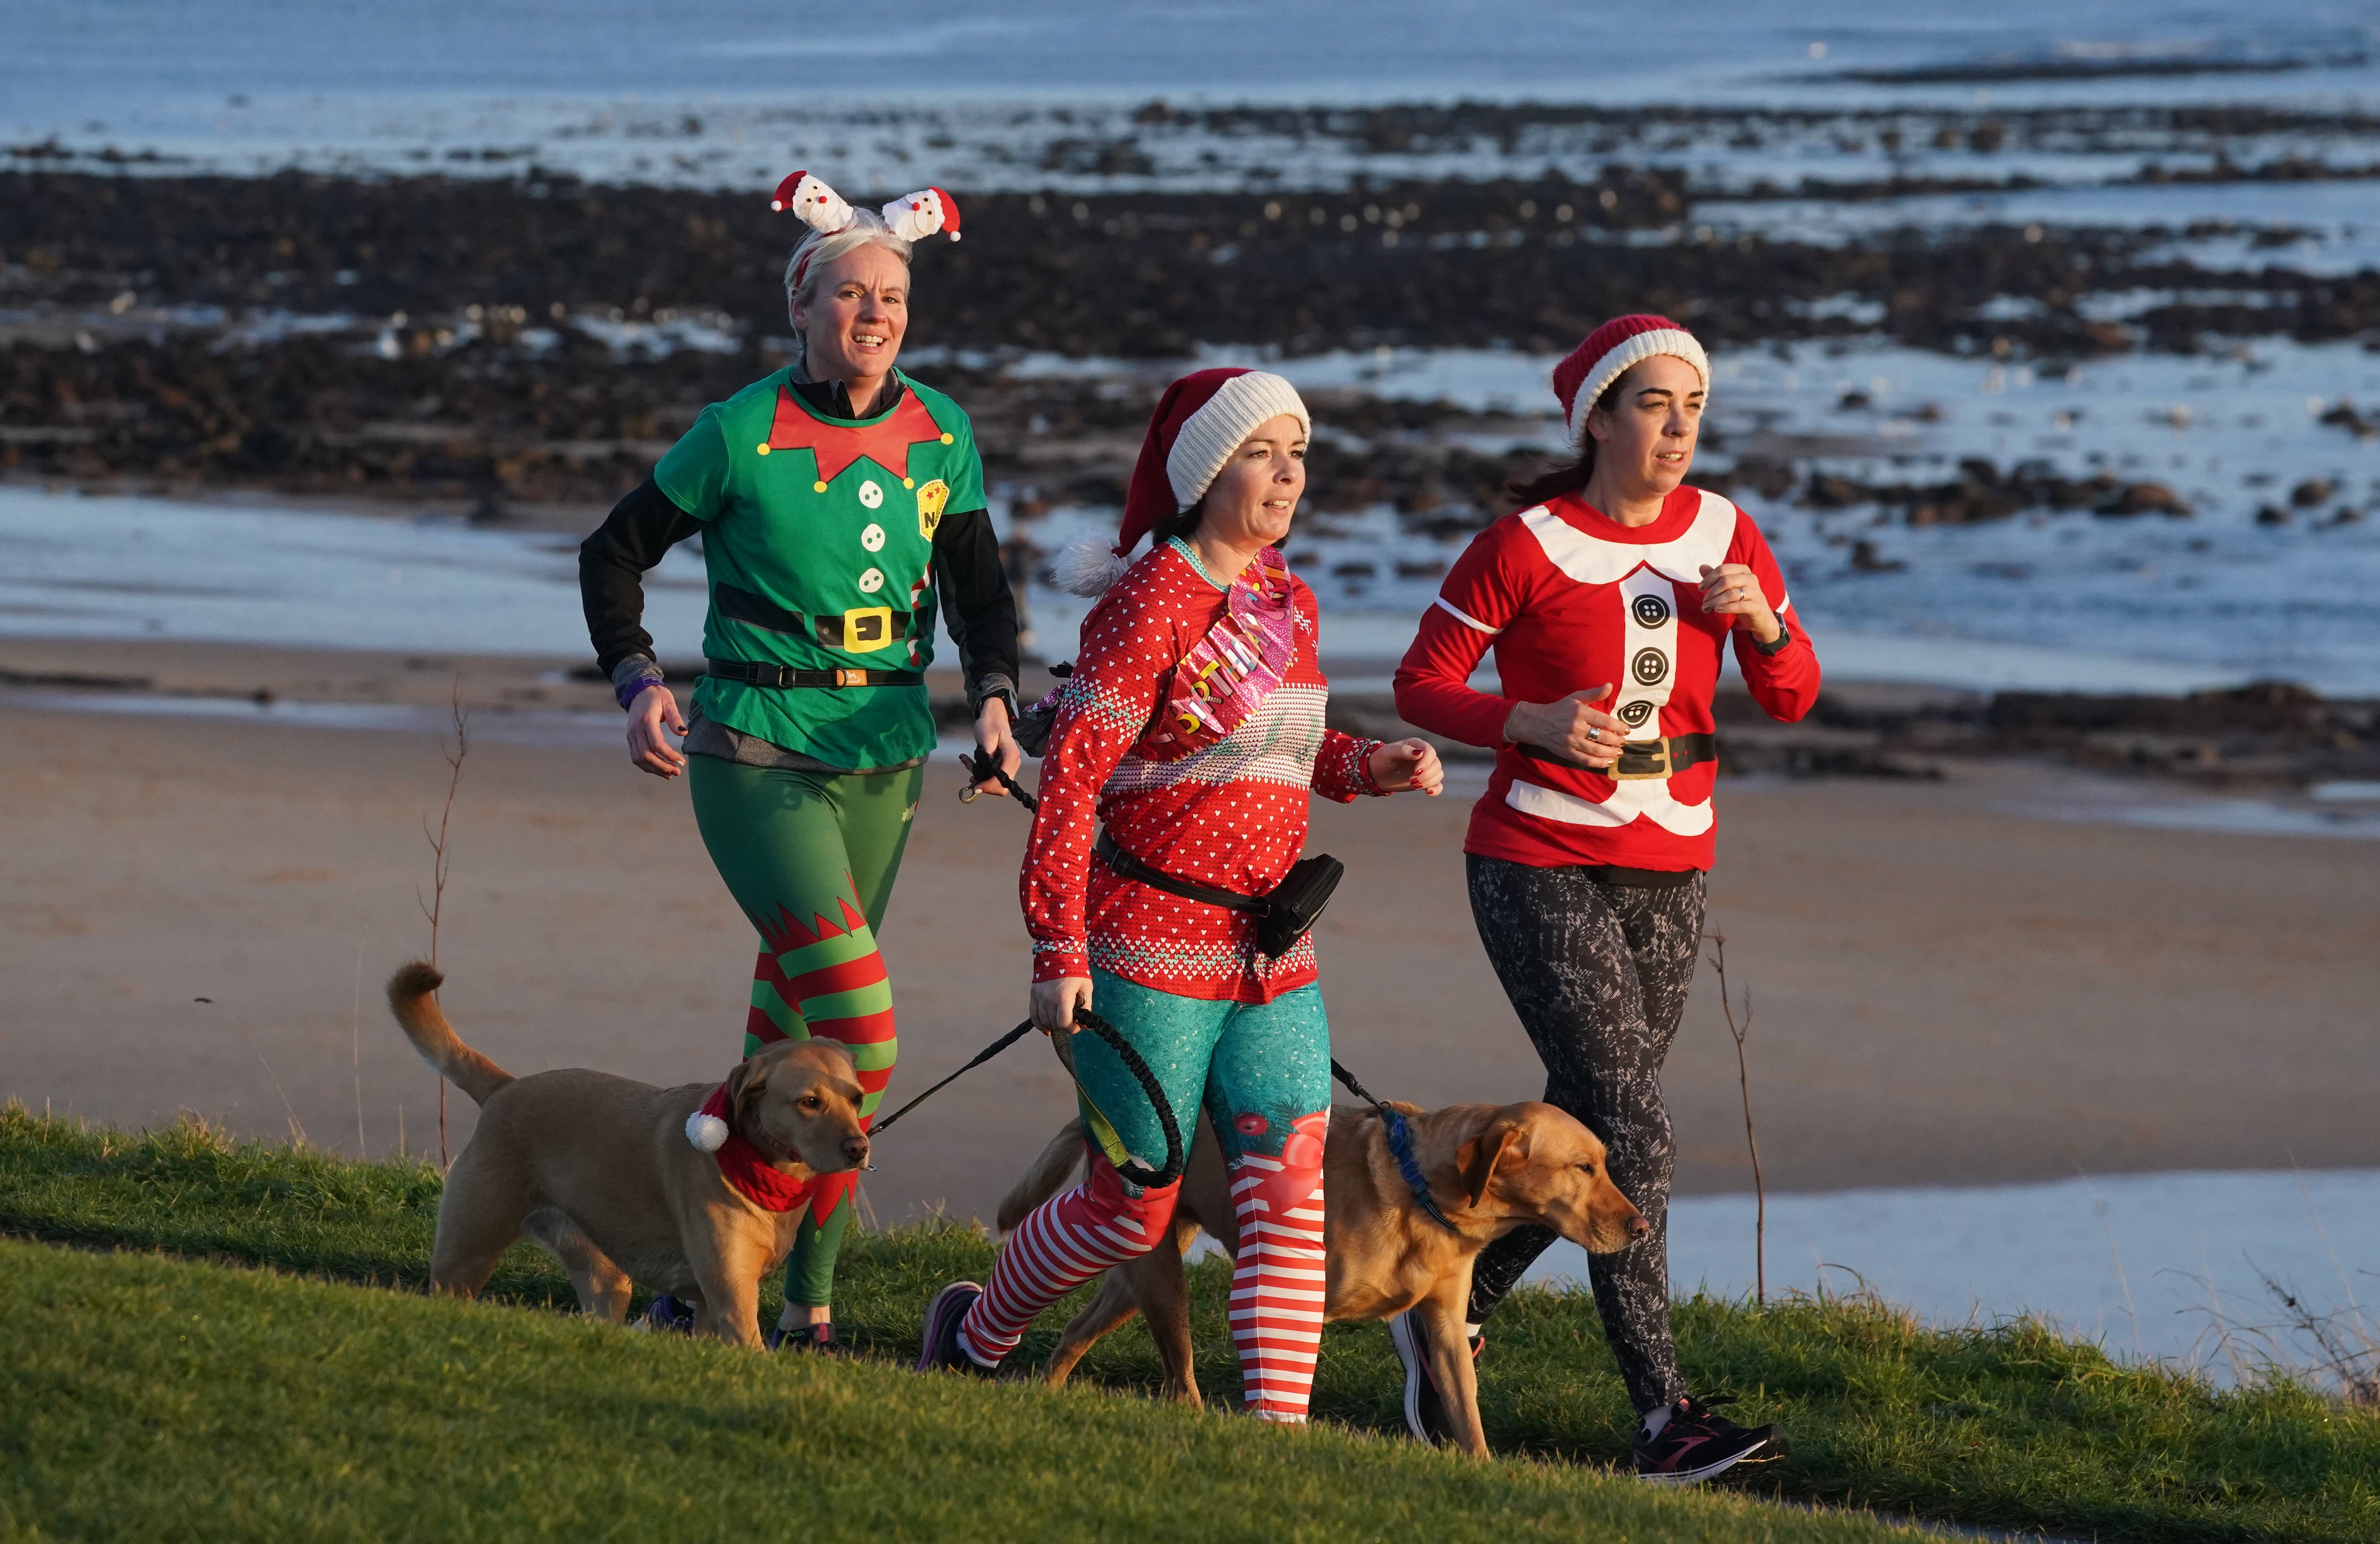 Runners dressed in festive outifits take part in the Christmas Eve park run at Whitley Bay